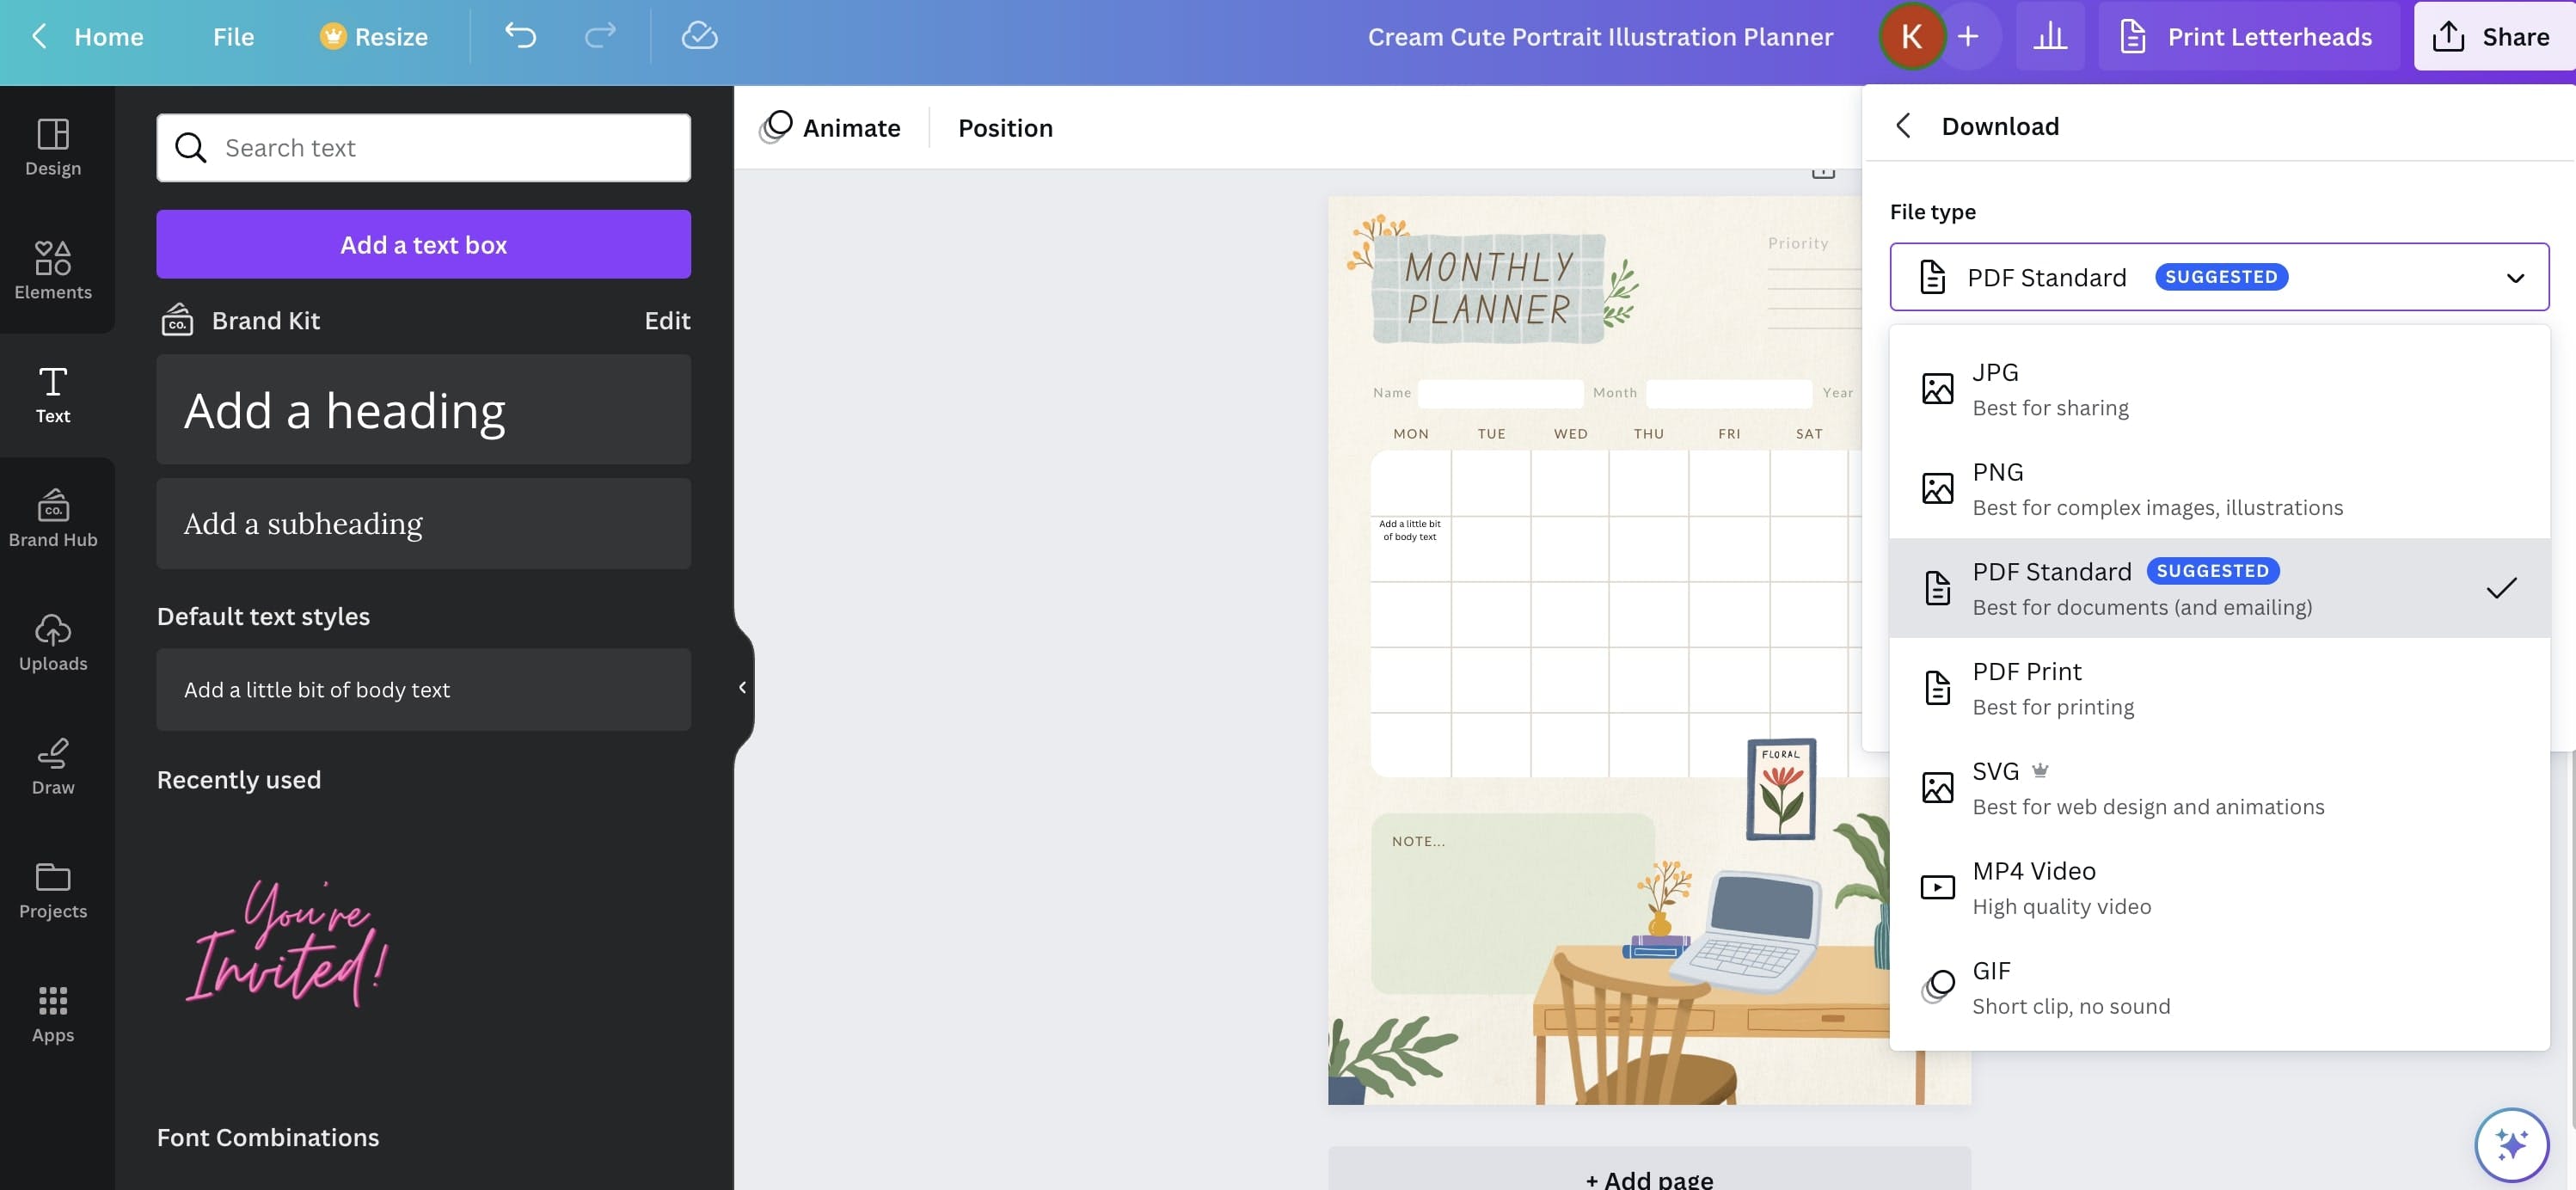 Export your planner in Canva